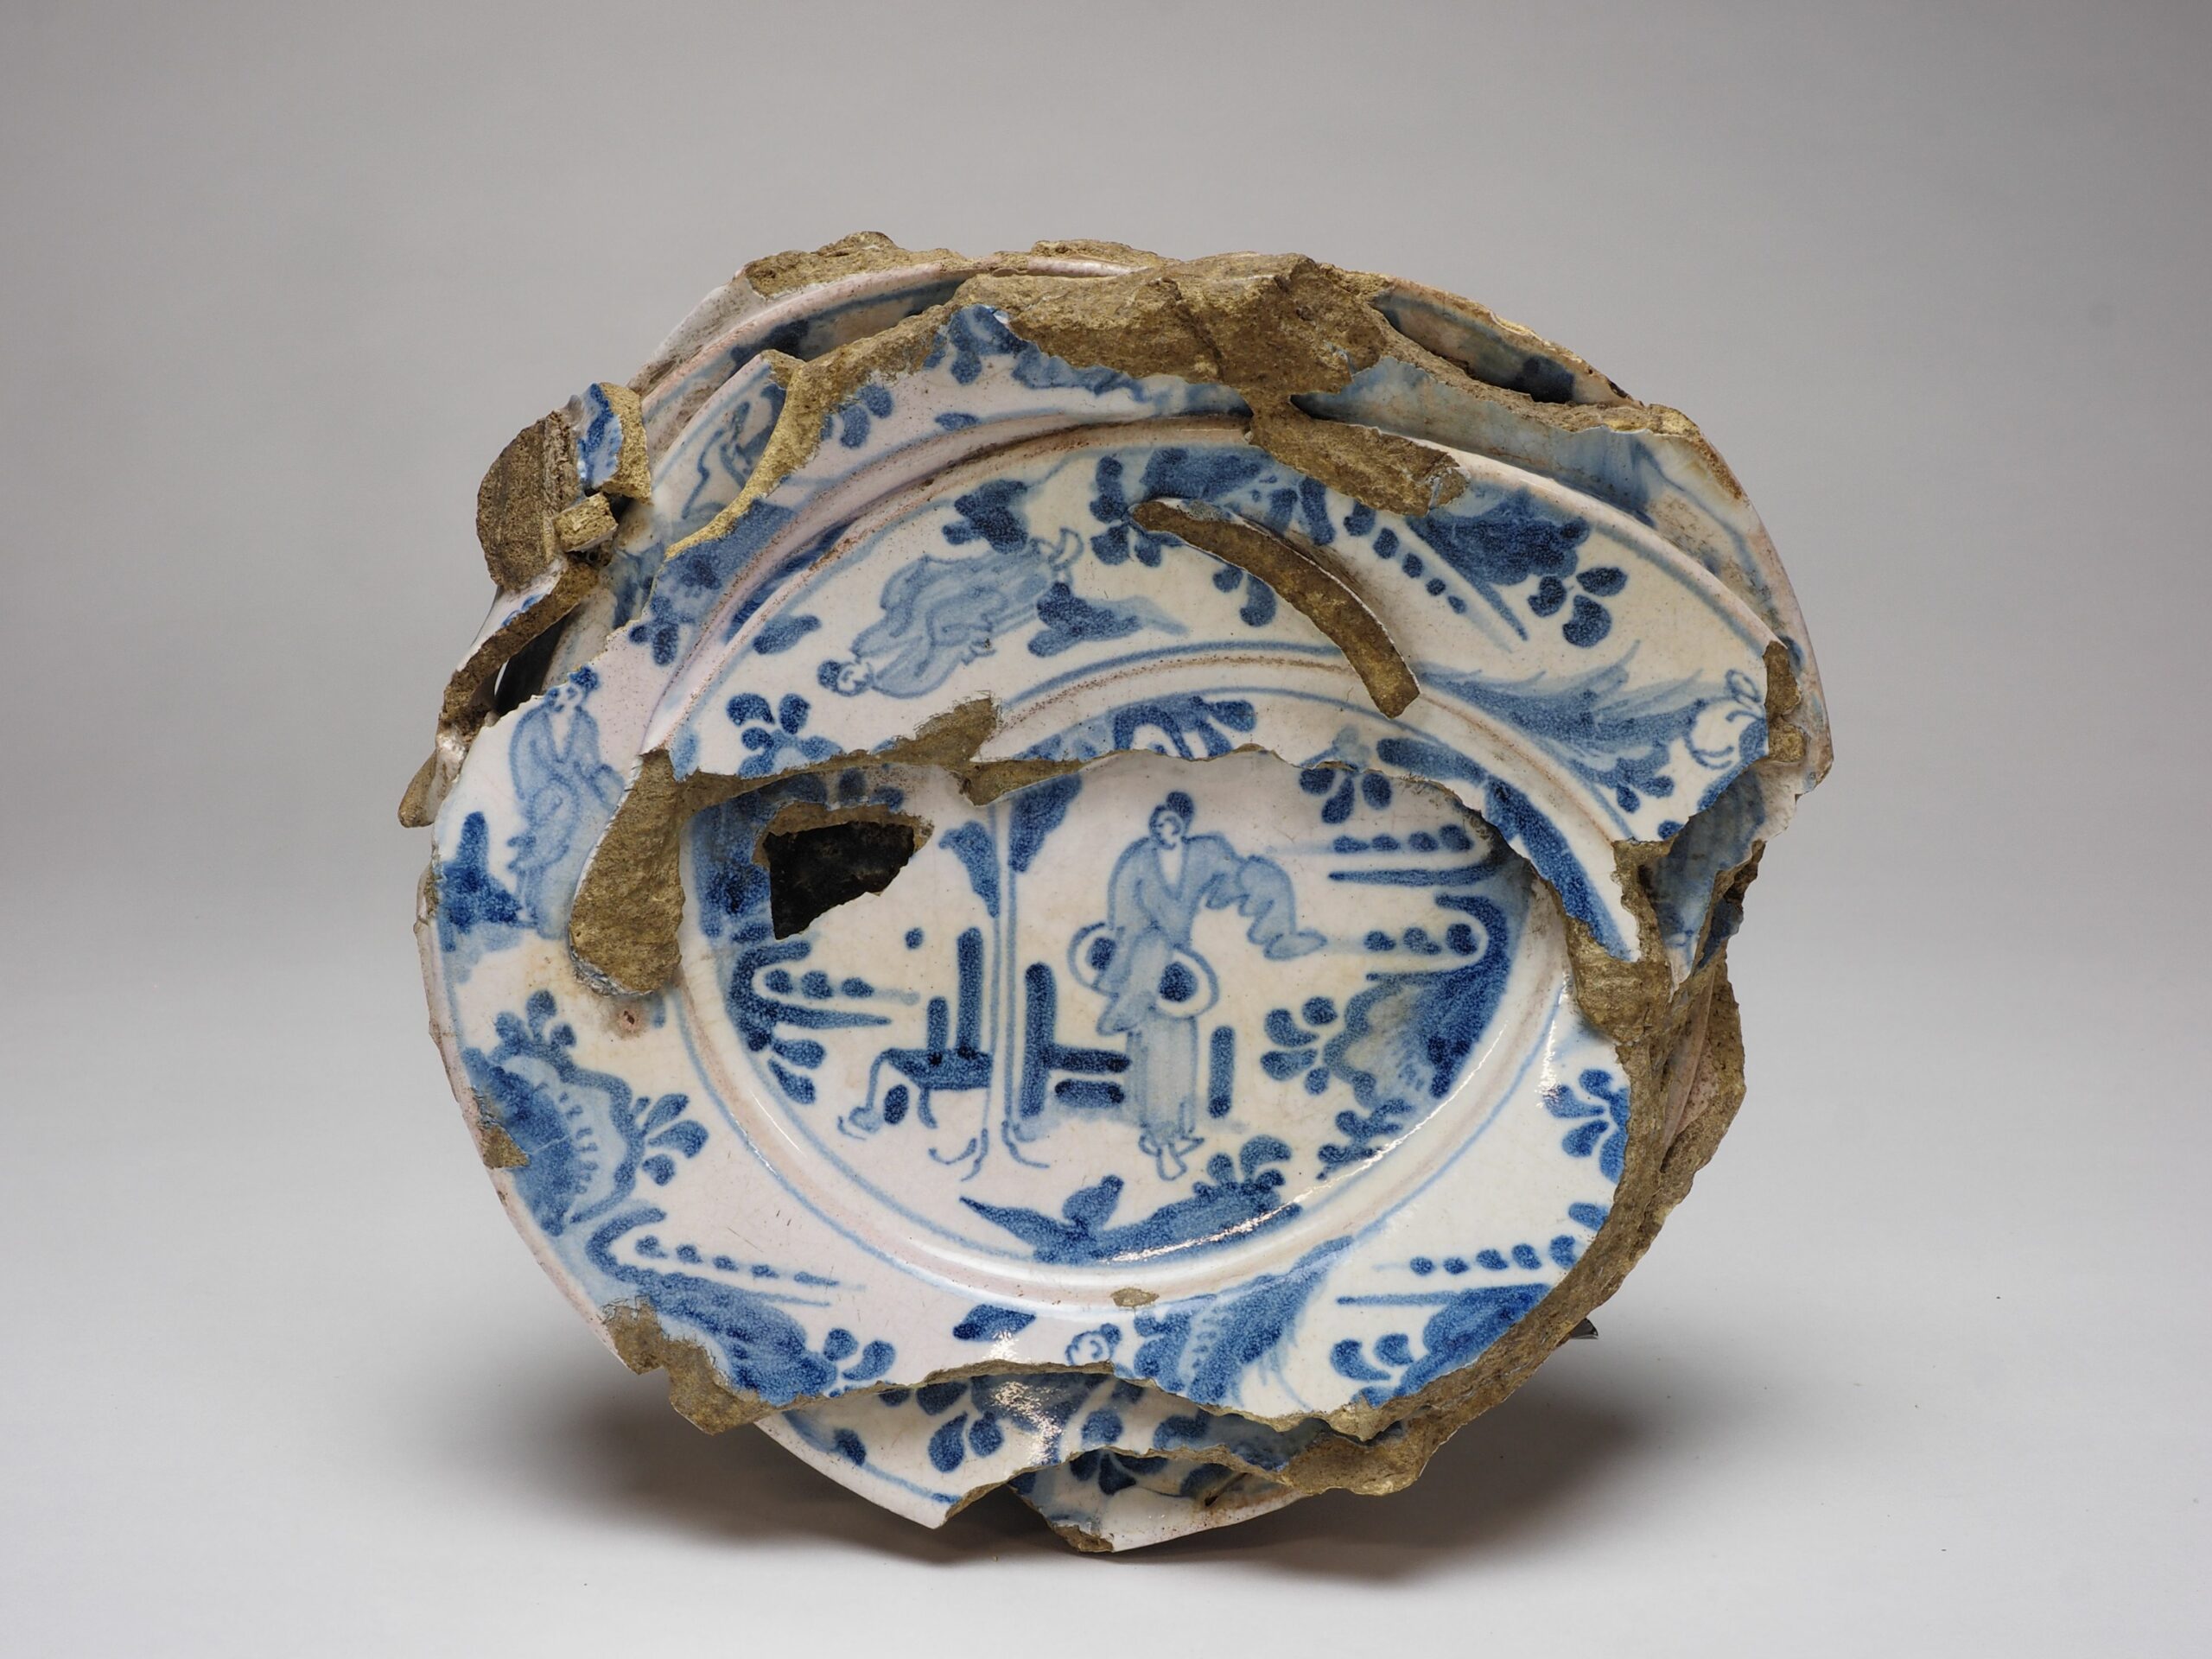 Waster, tin-glazed earthenware Delft ca. 1670-1700 inv. no. LM 2033-B Collection of Museum Prinsenhof Delft, on loan from the Cultural Heritage Agency of the Netherlands